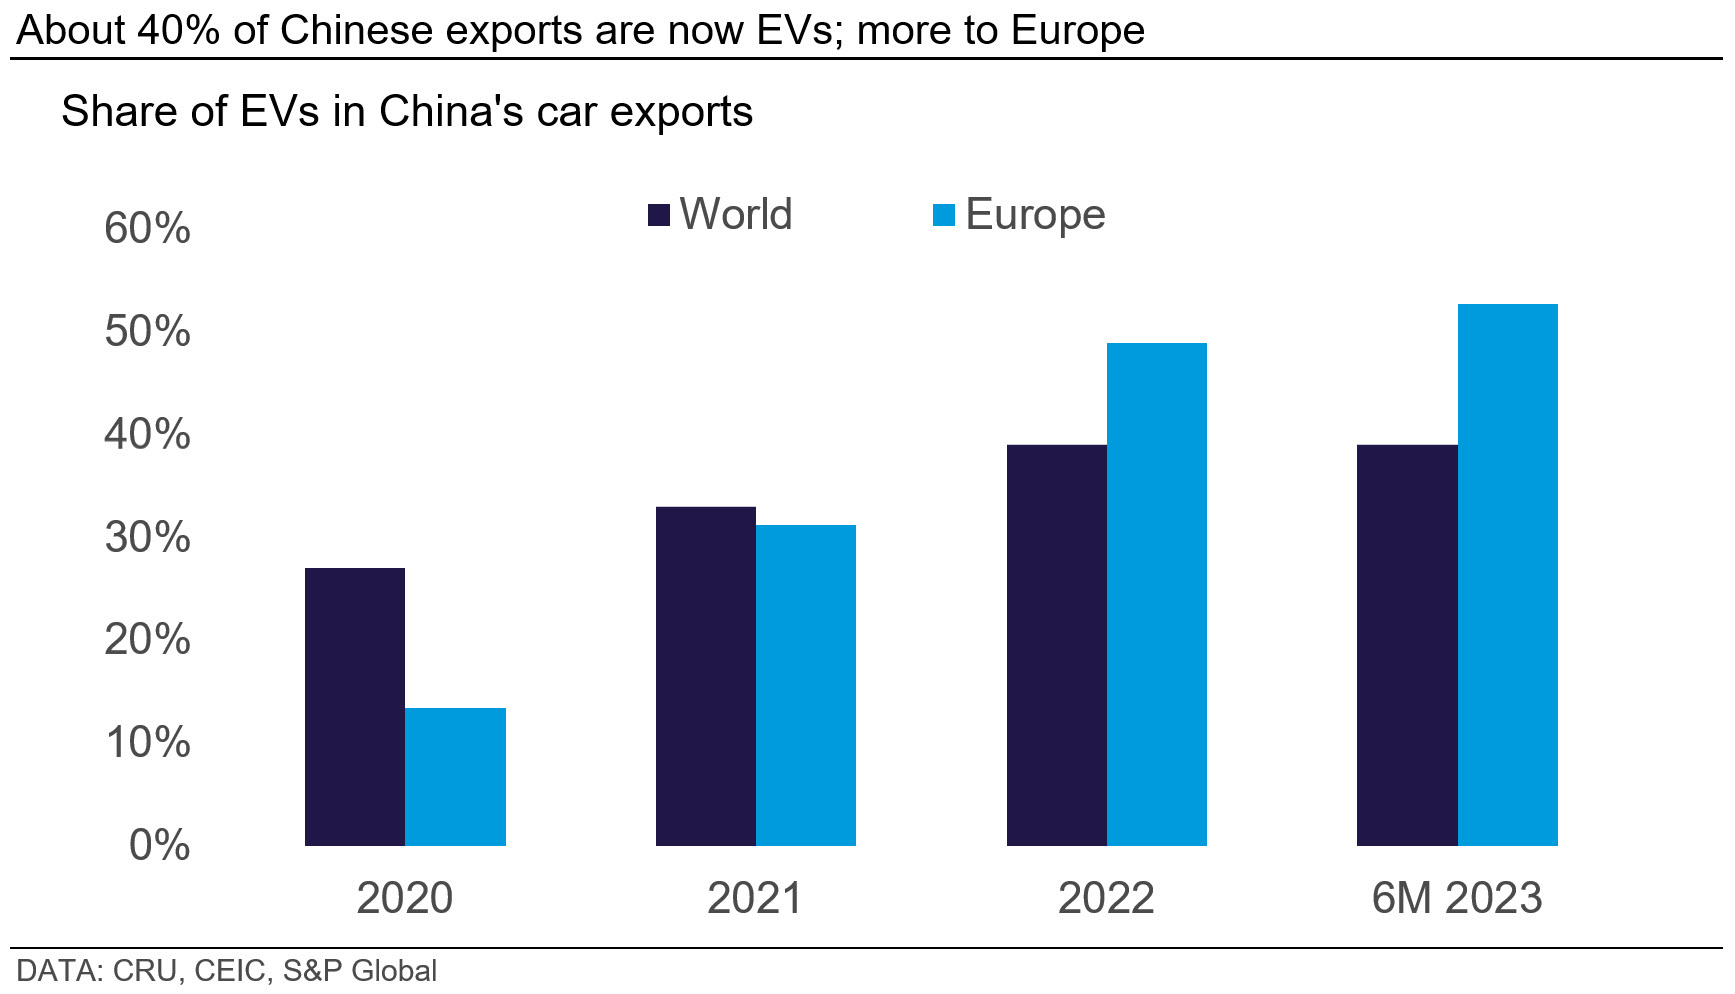 Graph showing that about 40% of Chinese exports are now EVs